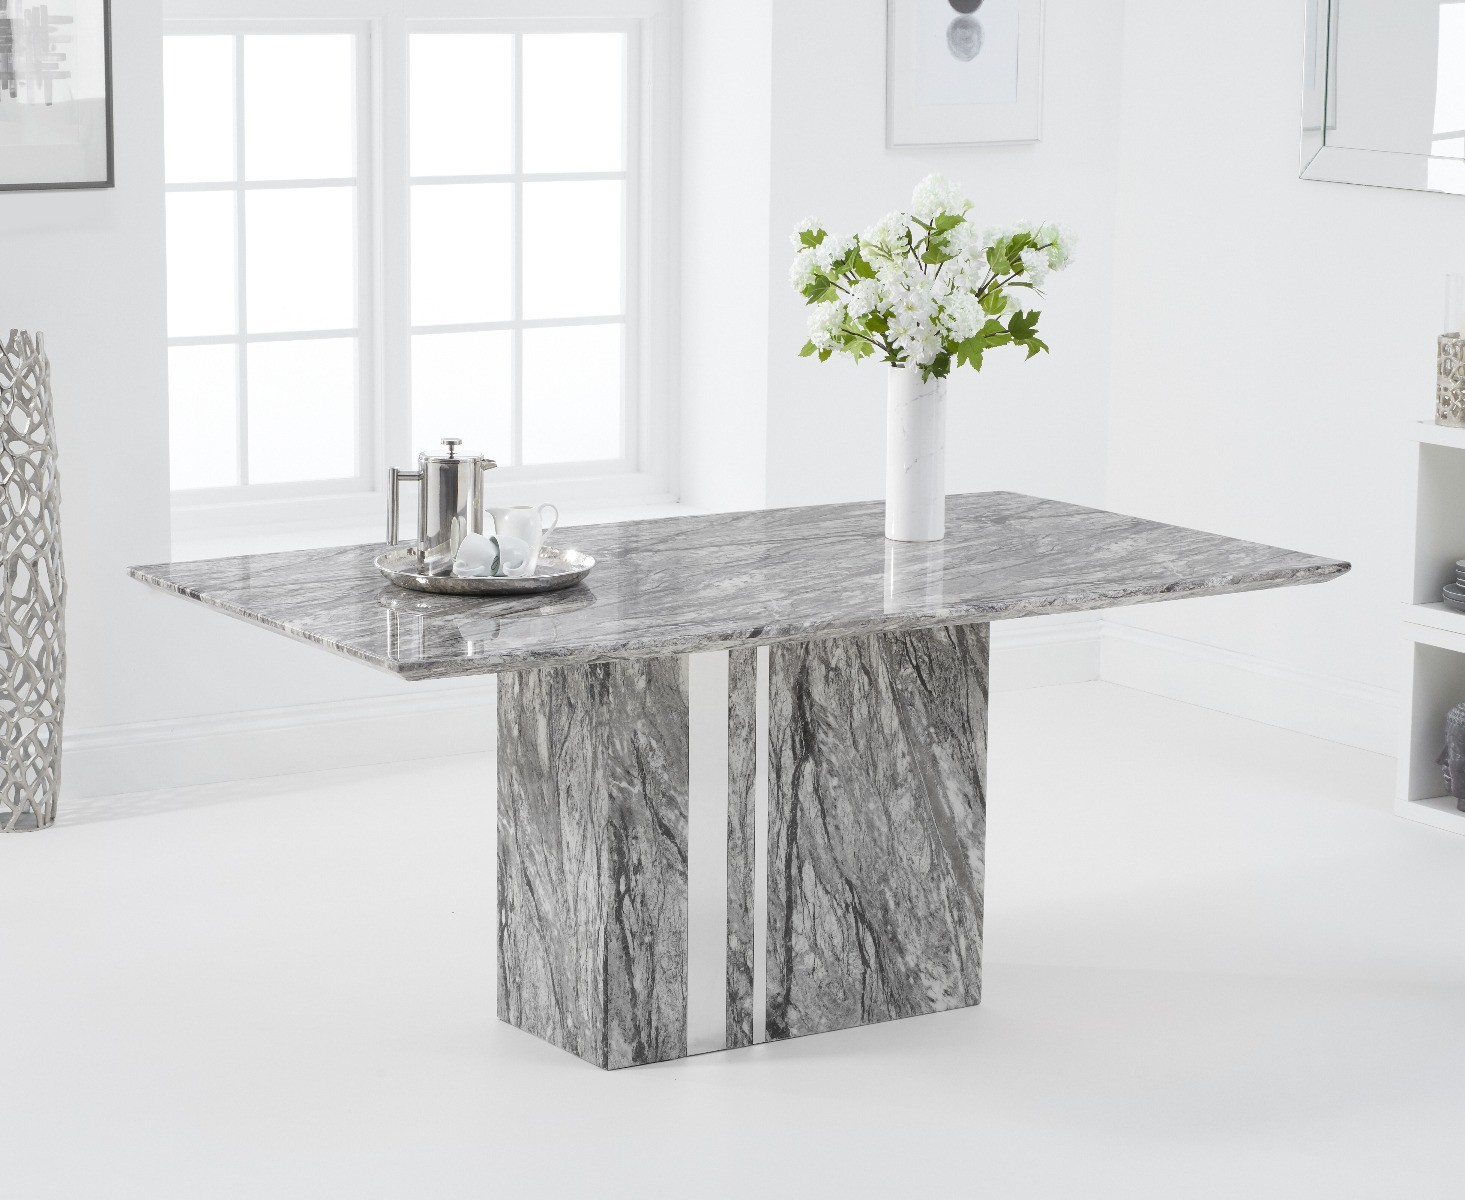 Photo 2 of Alicia 180cm grey marble dining table with 6 black austin chairs